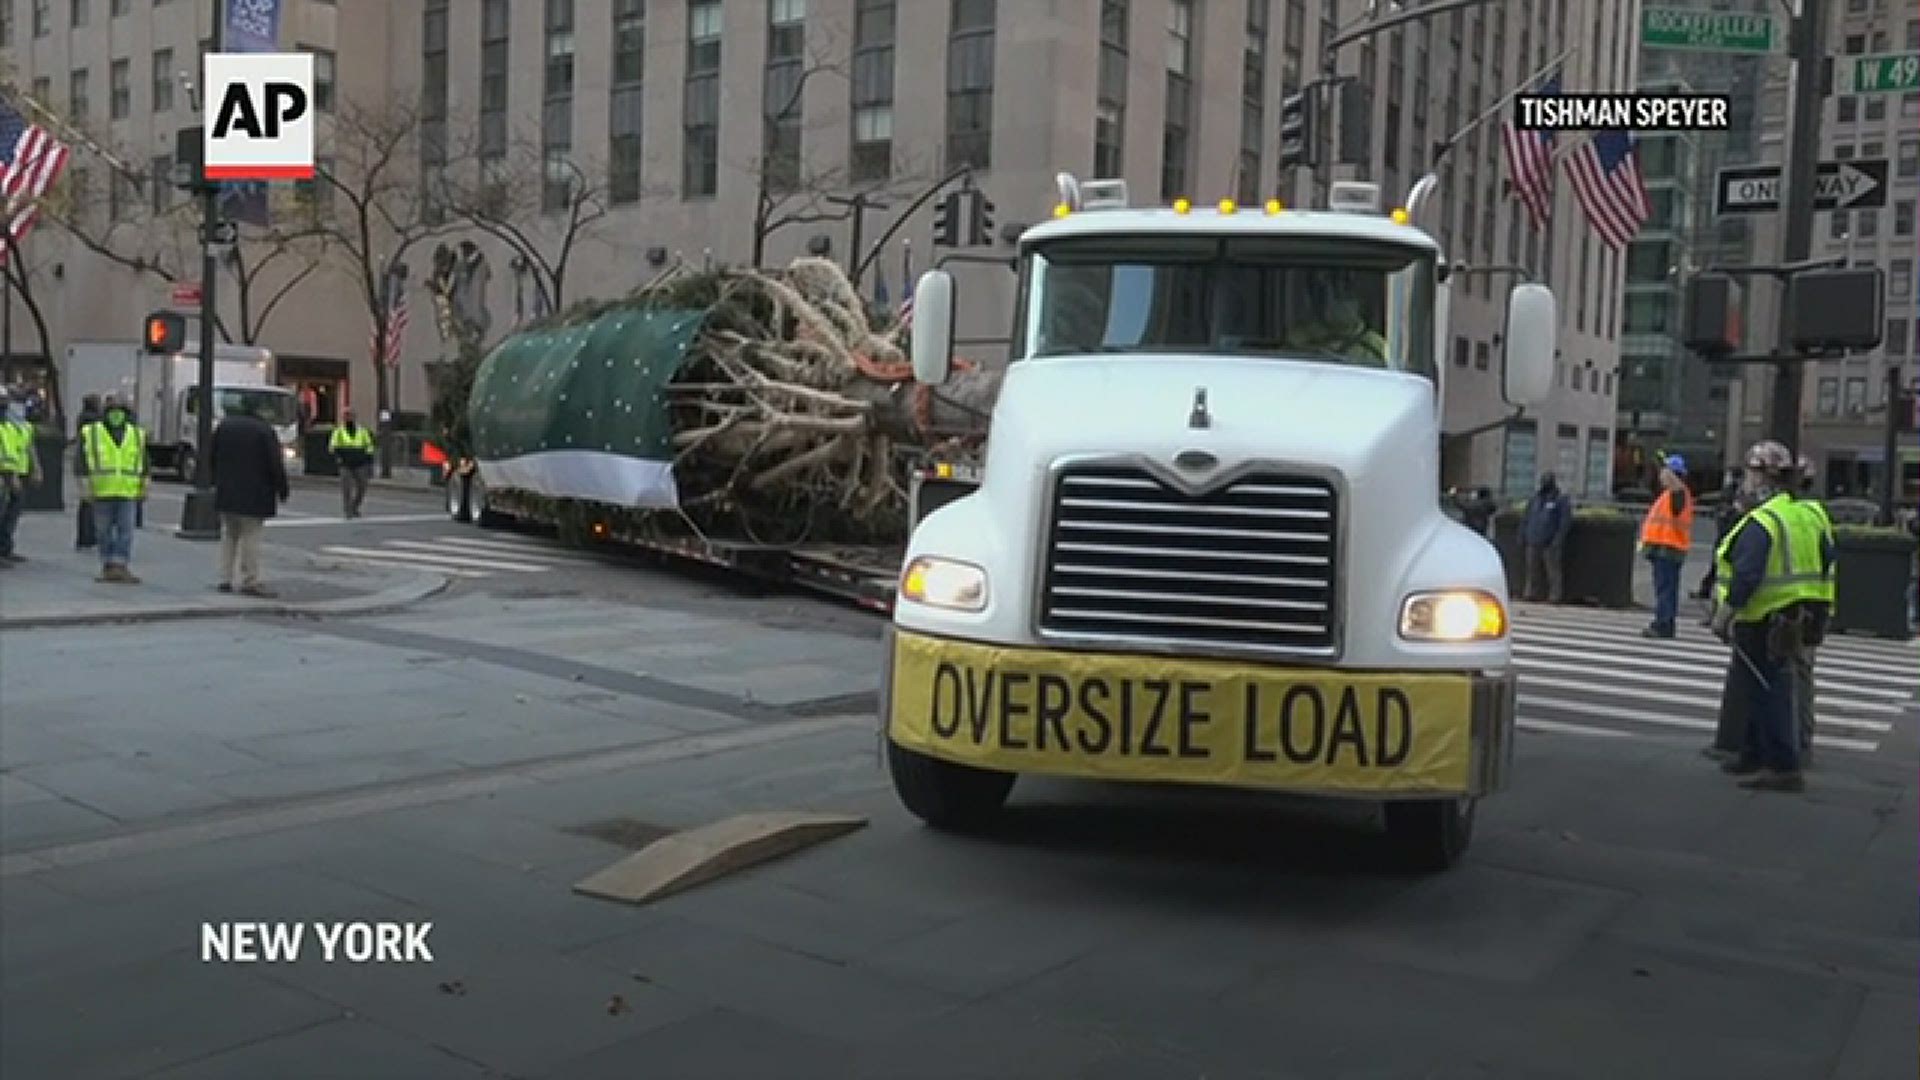 A huge Norway spruce arrived at New York City's Rockefeller Center to serve as one of the world's most famous Christmas trees.